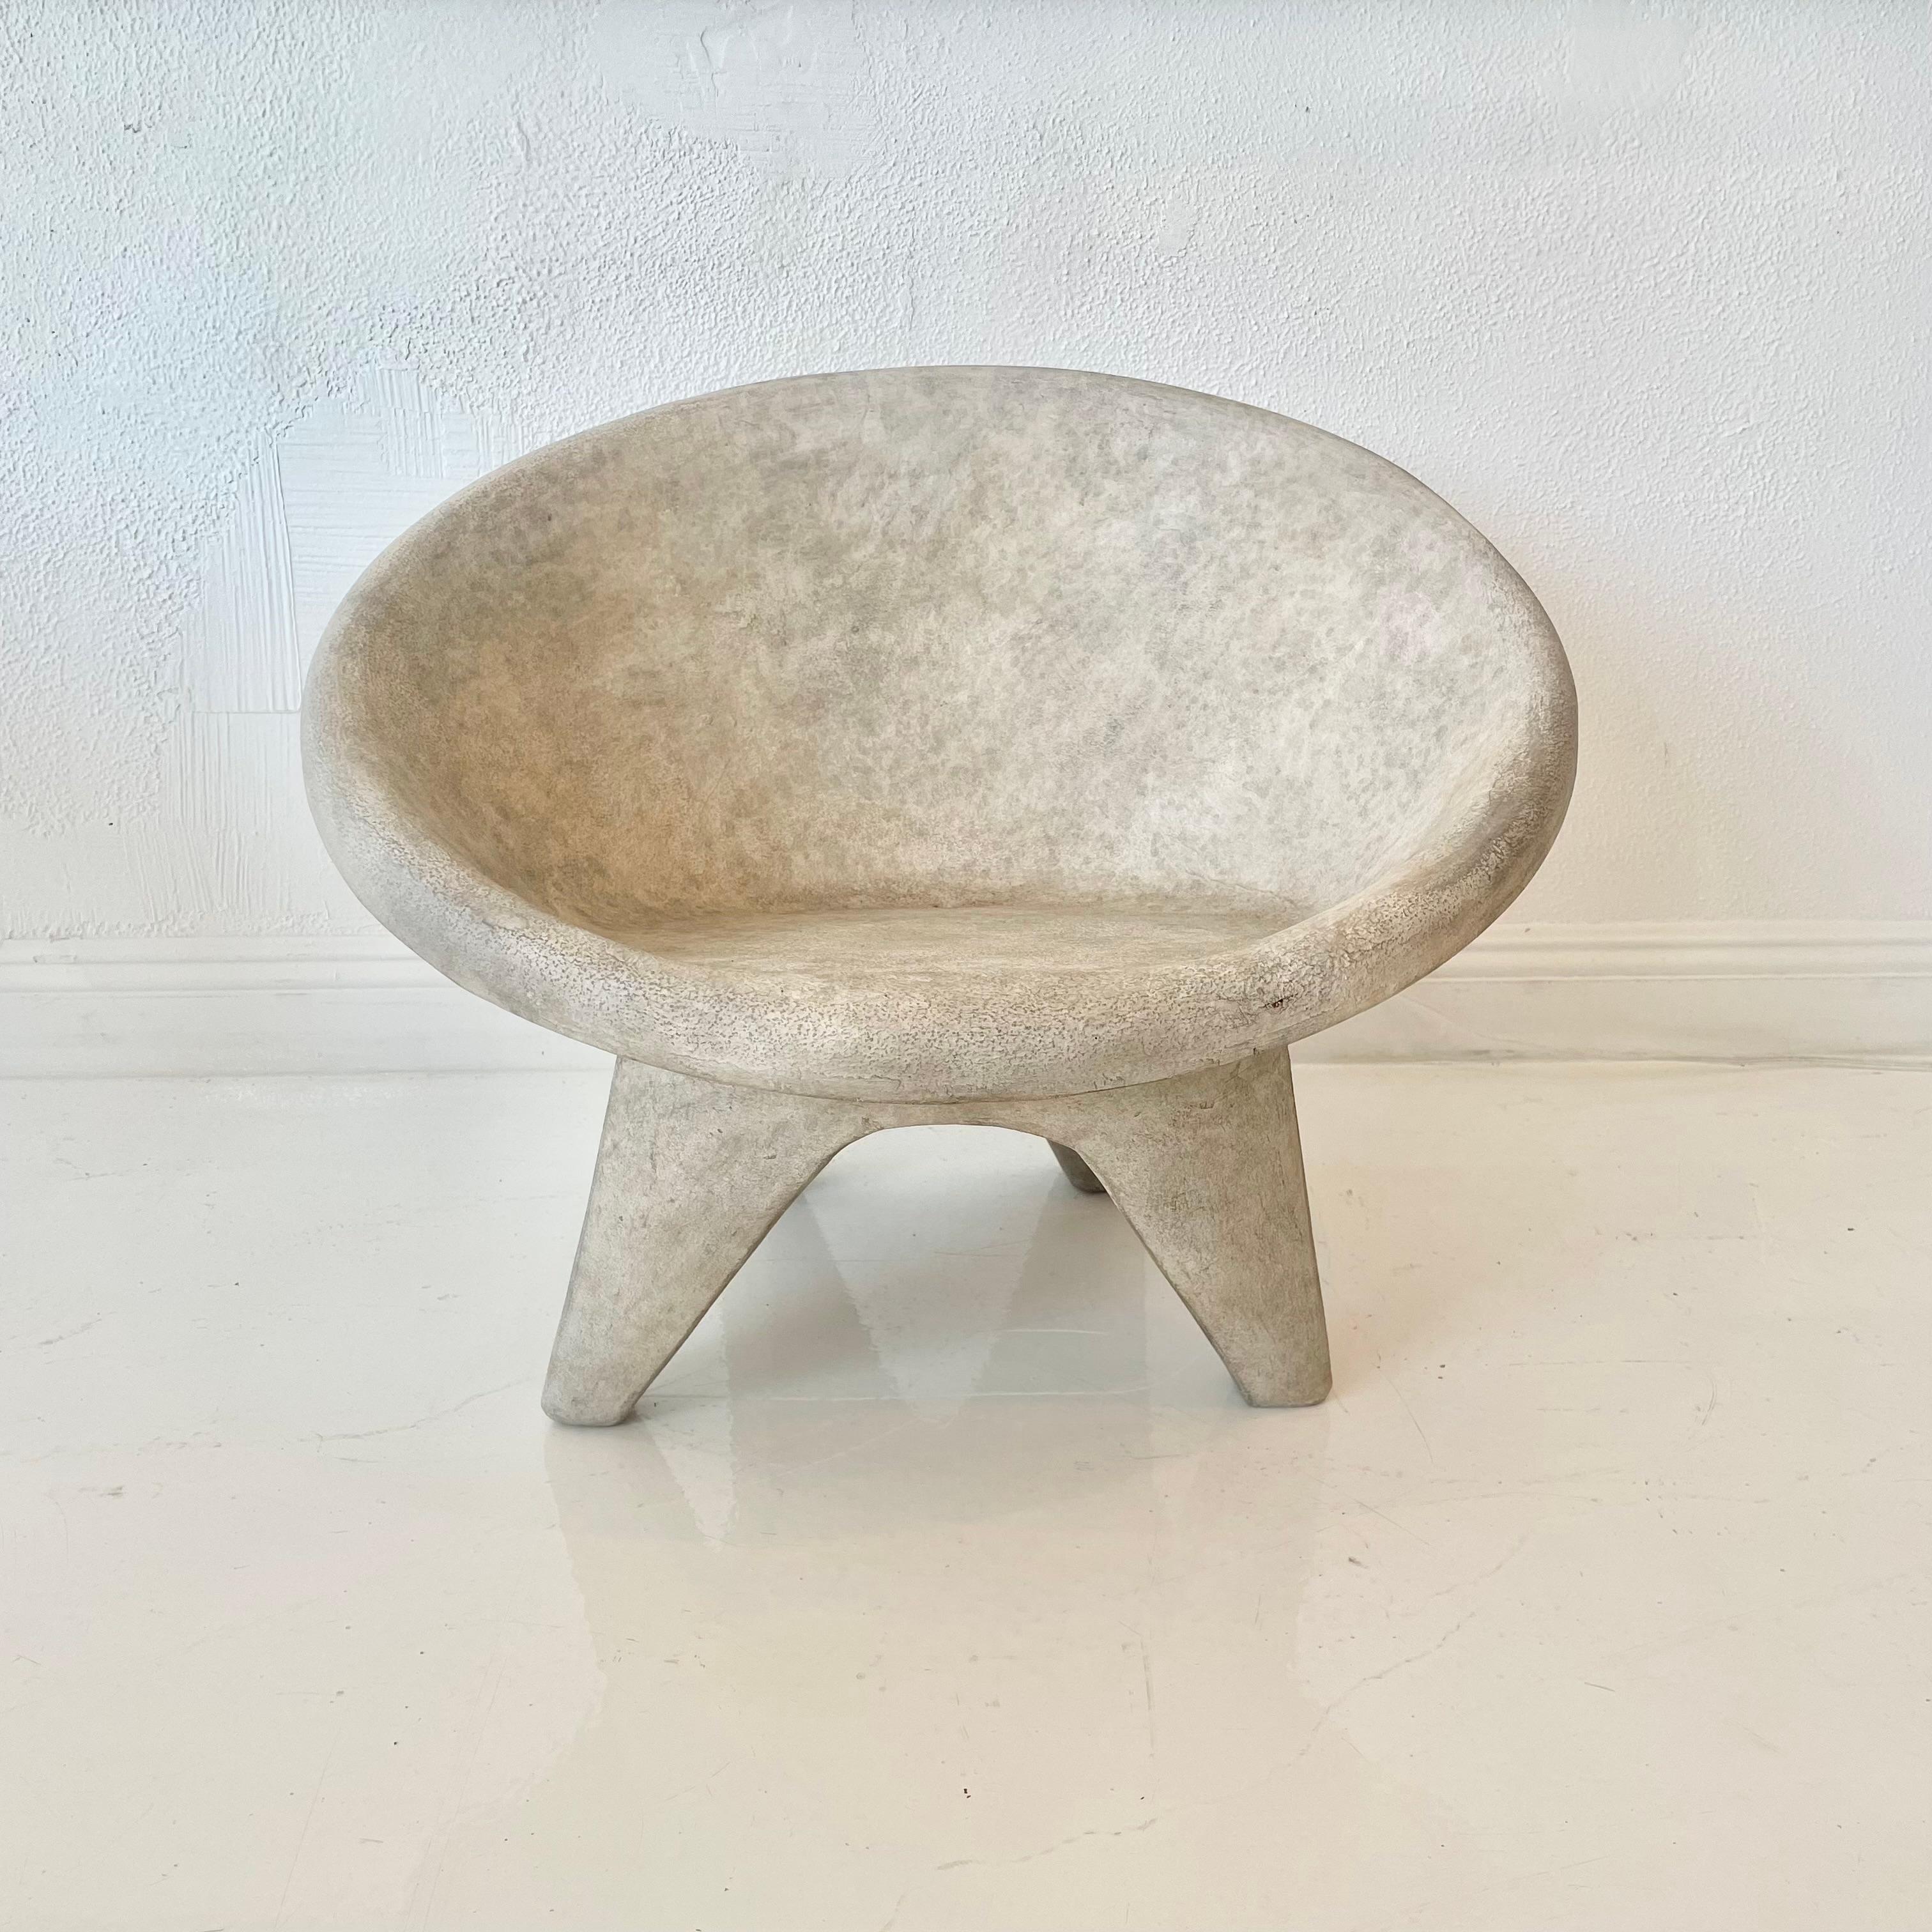 Fantastic outdoor chair made of solid concrete and each with a perfect and unique patina. Round saucer seat with angular legs. Incredible modern design perfect for any outdoor space. Factory drilled hole in the seat of each chair for water to drain.